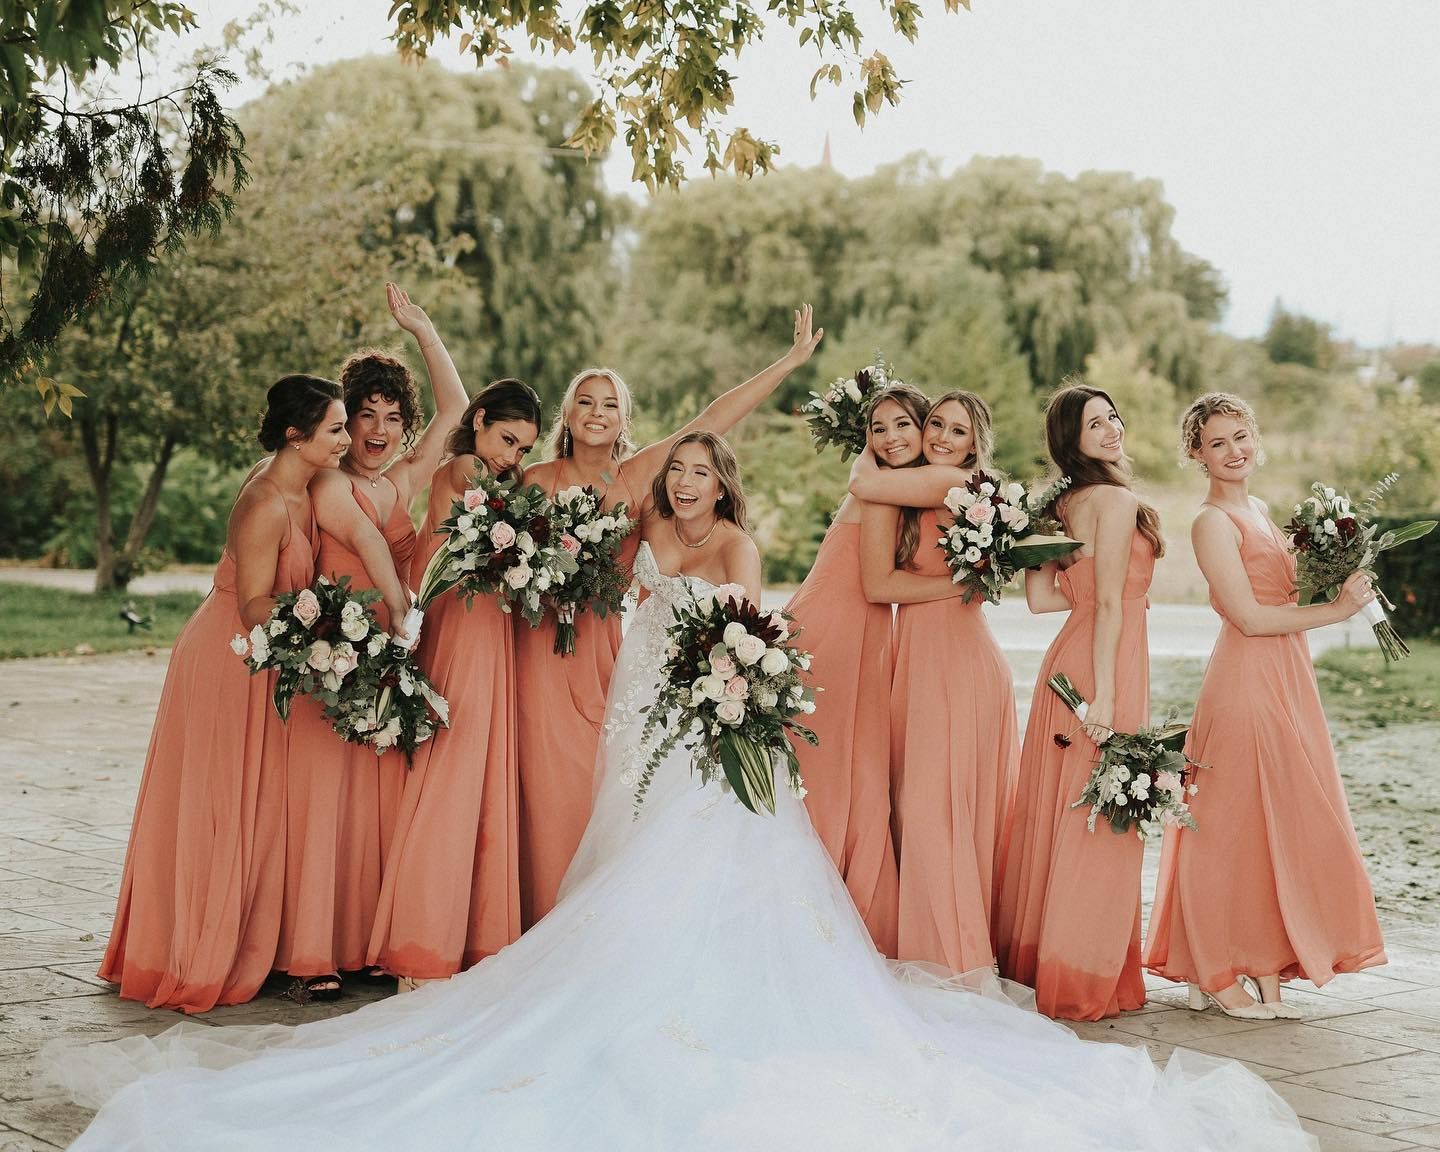 where to get bridesmaid dresses fast